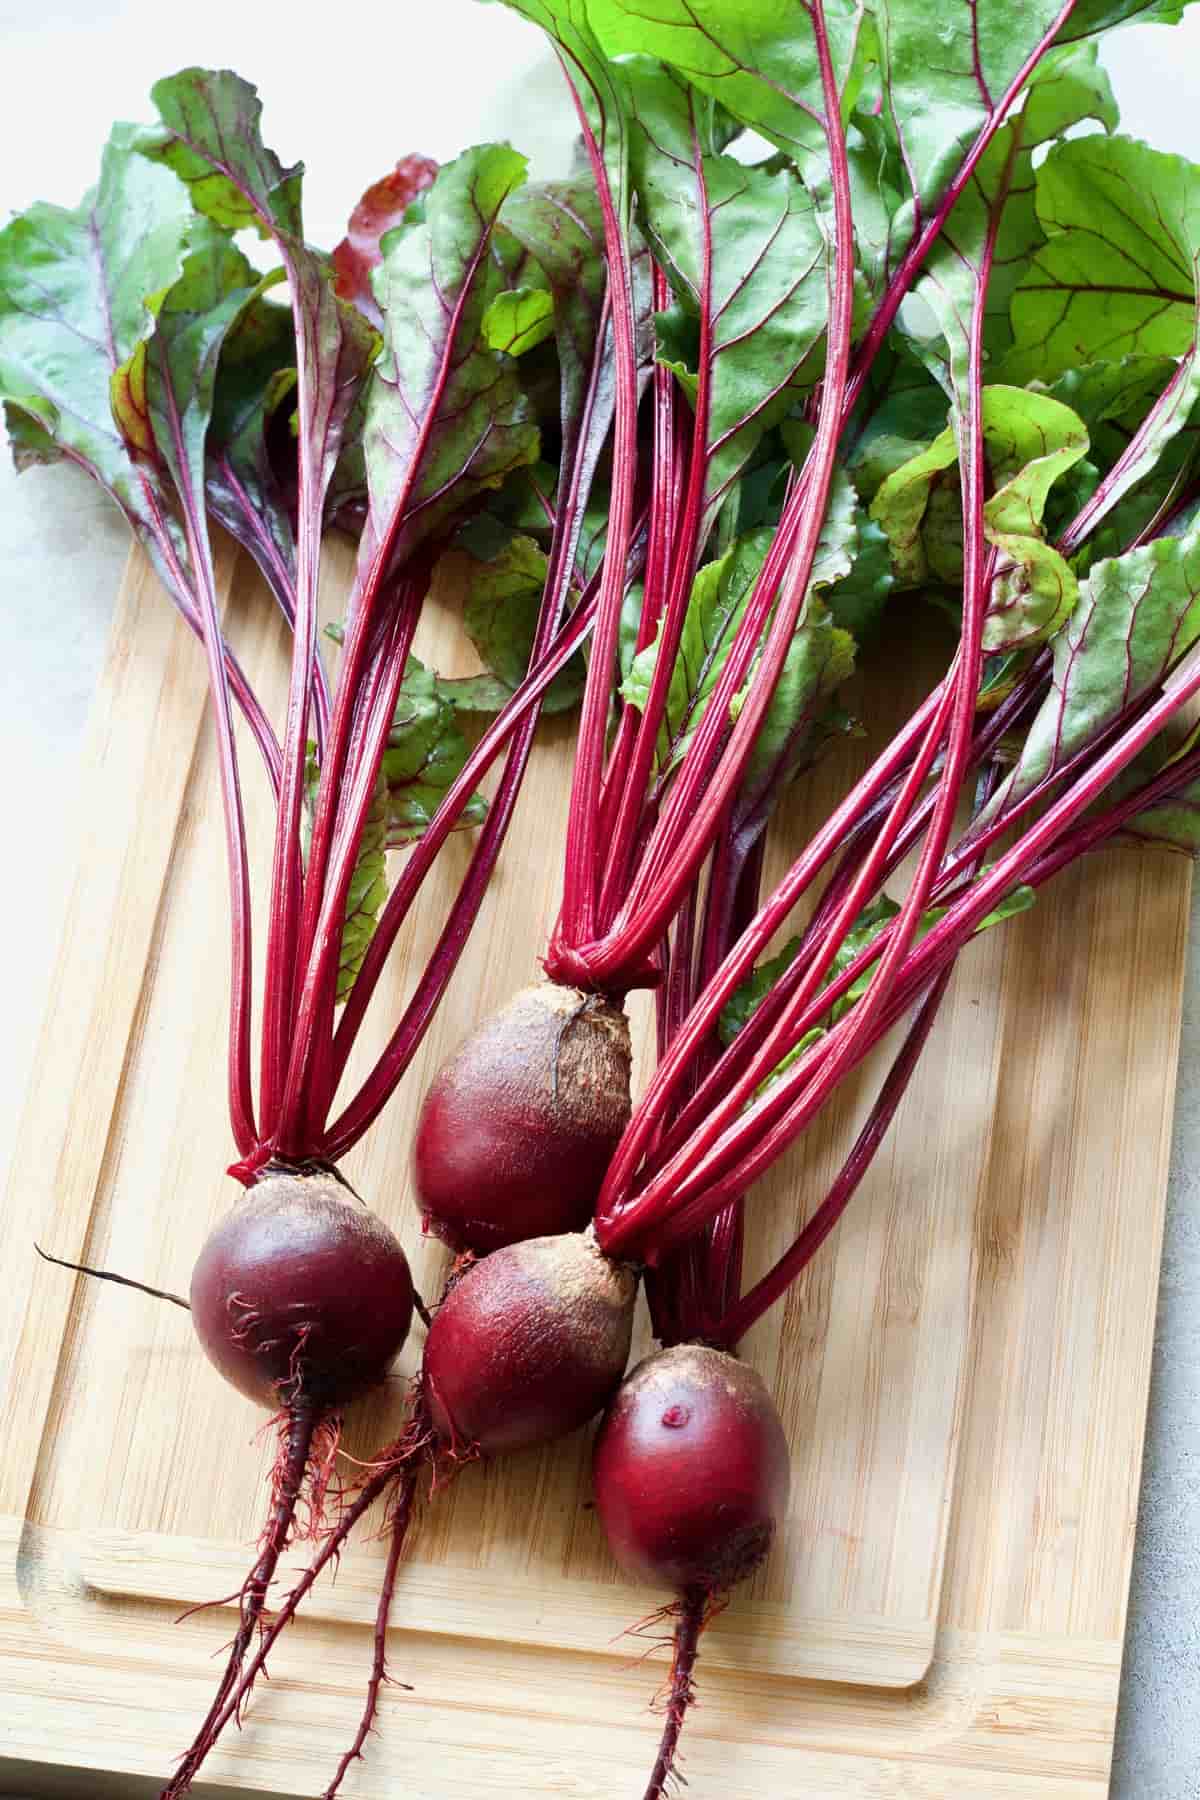 Bunch of young beets with greens on a board.